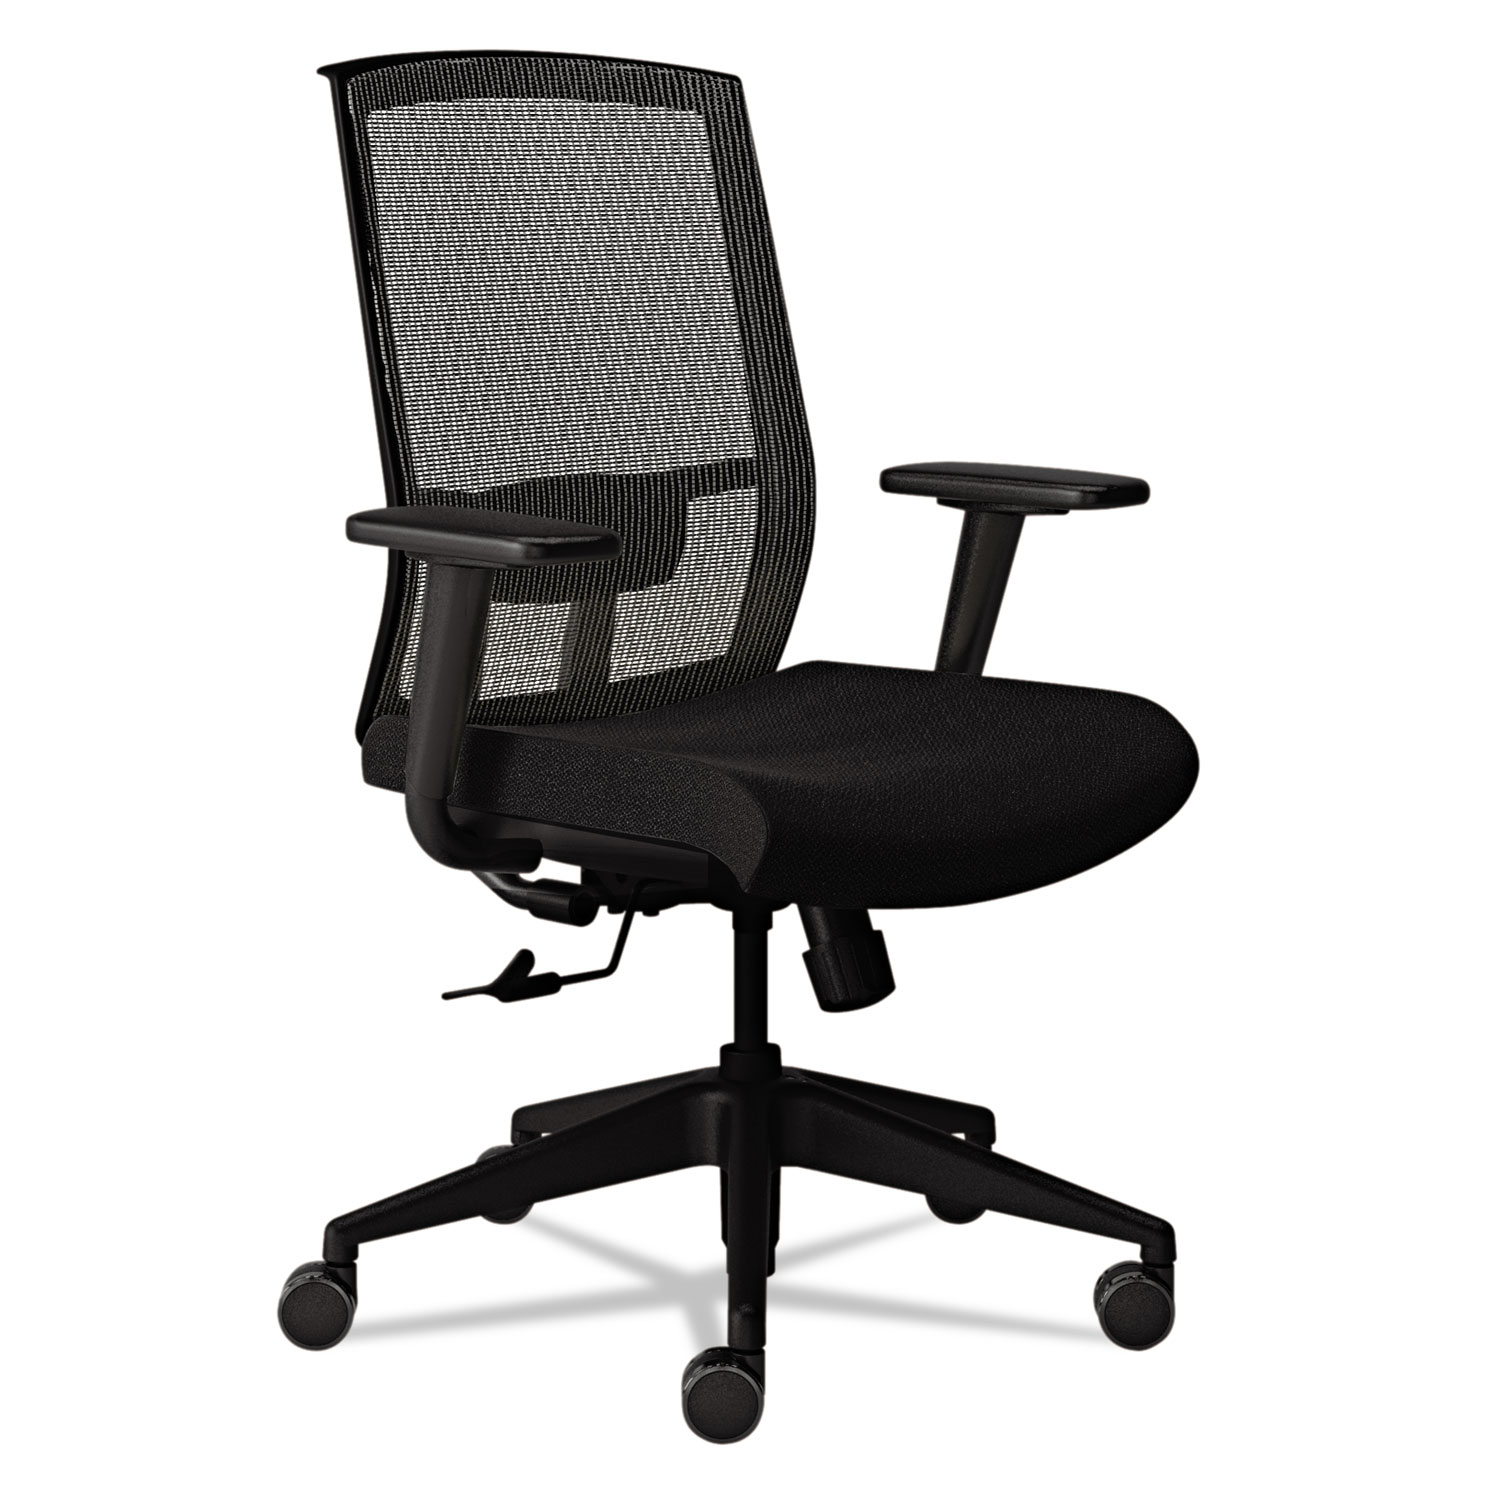  Safco GS11SVRBLK Gist Multi-Purpose Chair, Supports up to 300 lbs., Silver Seat/Black Back, Black Base (MLNGS11SVRBLK) 